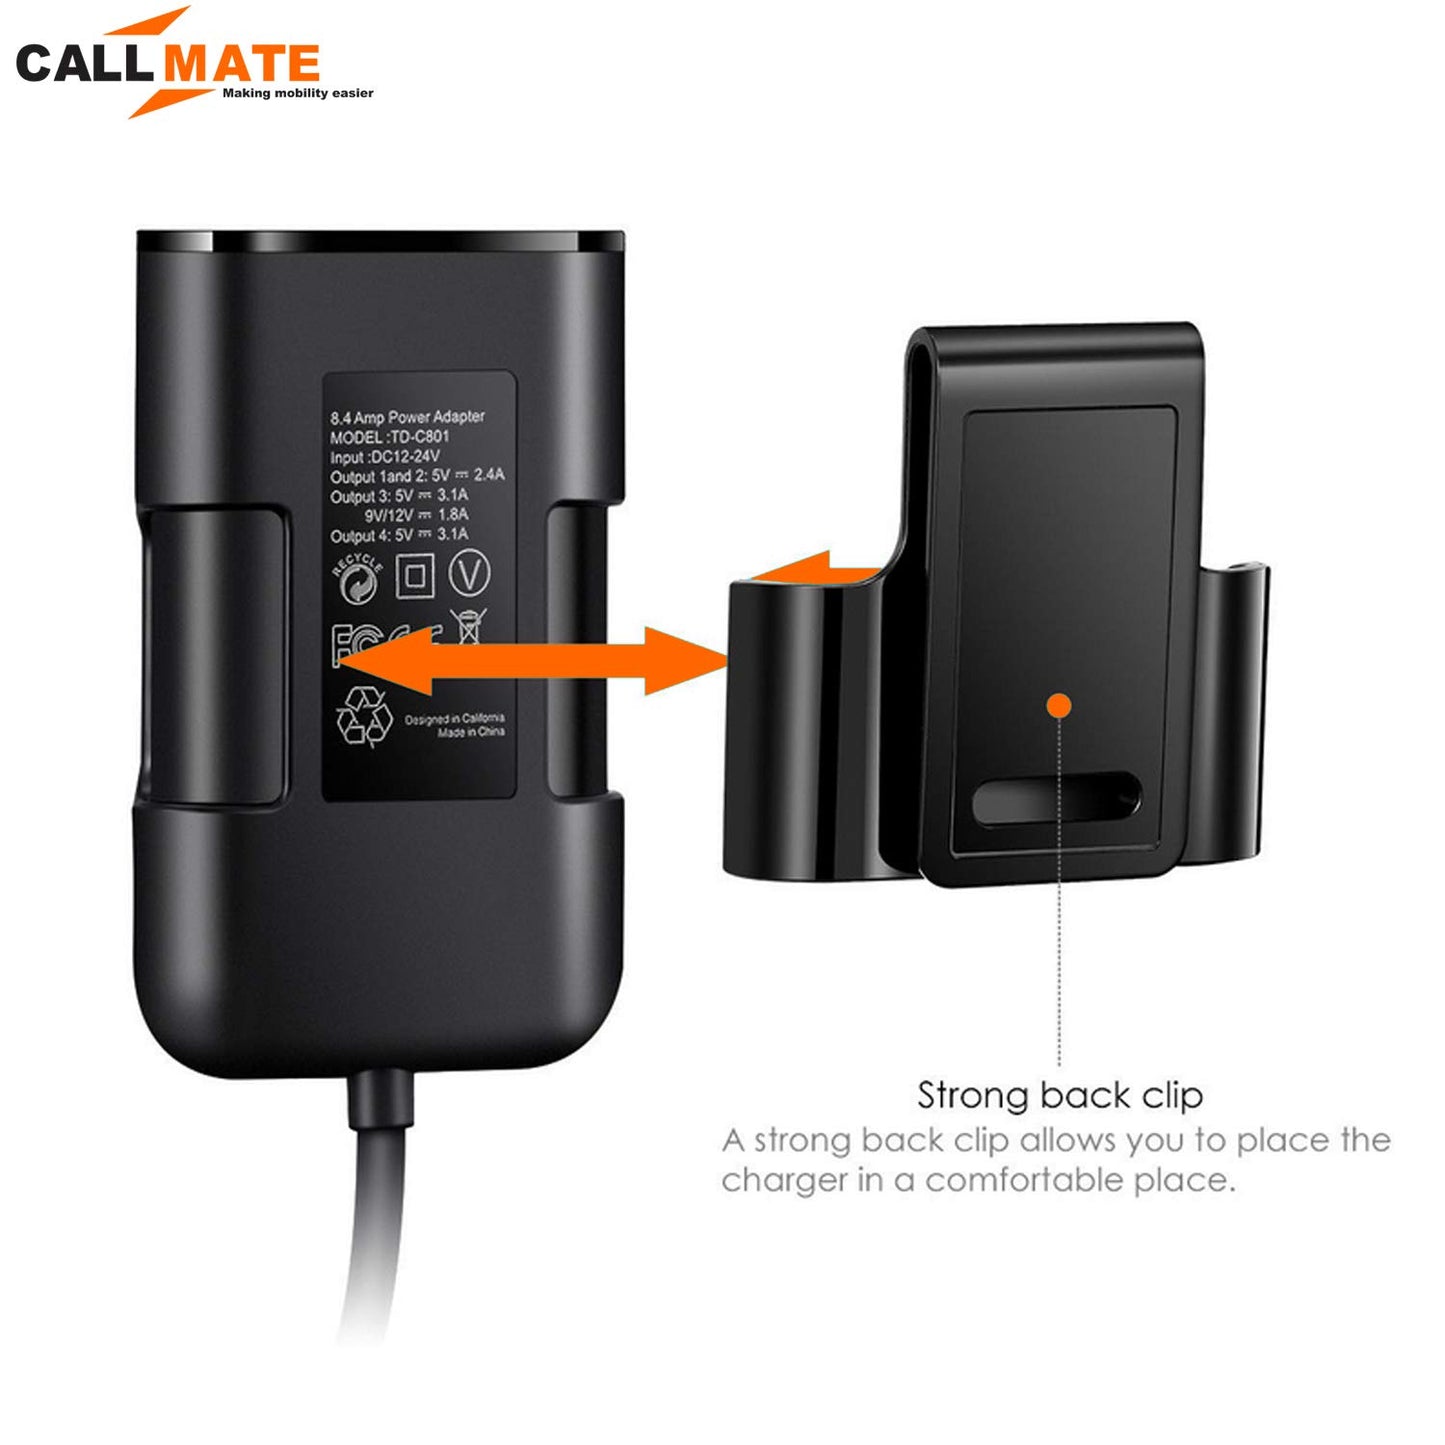 Synapse: The Extended Car Charger